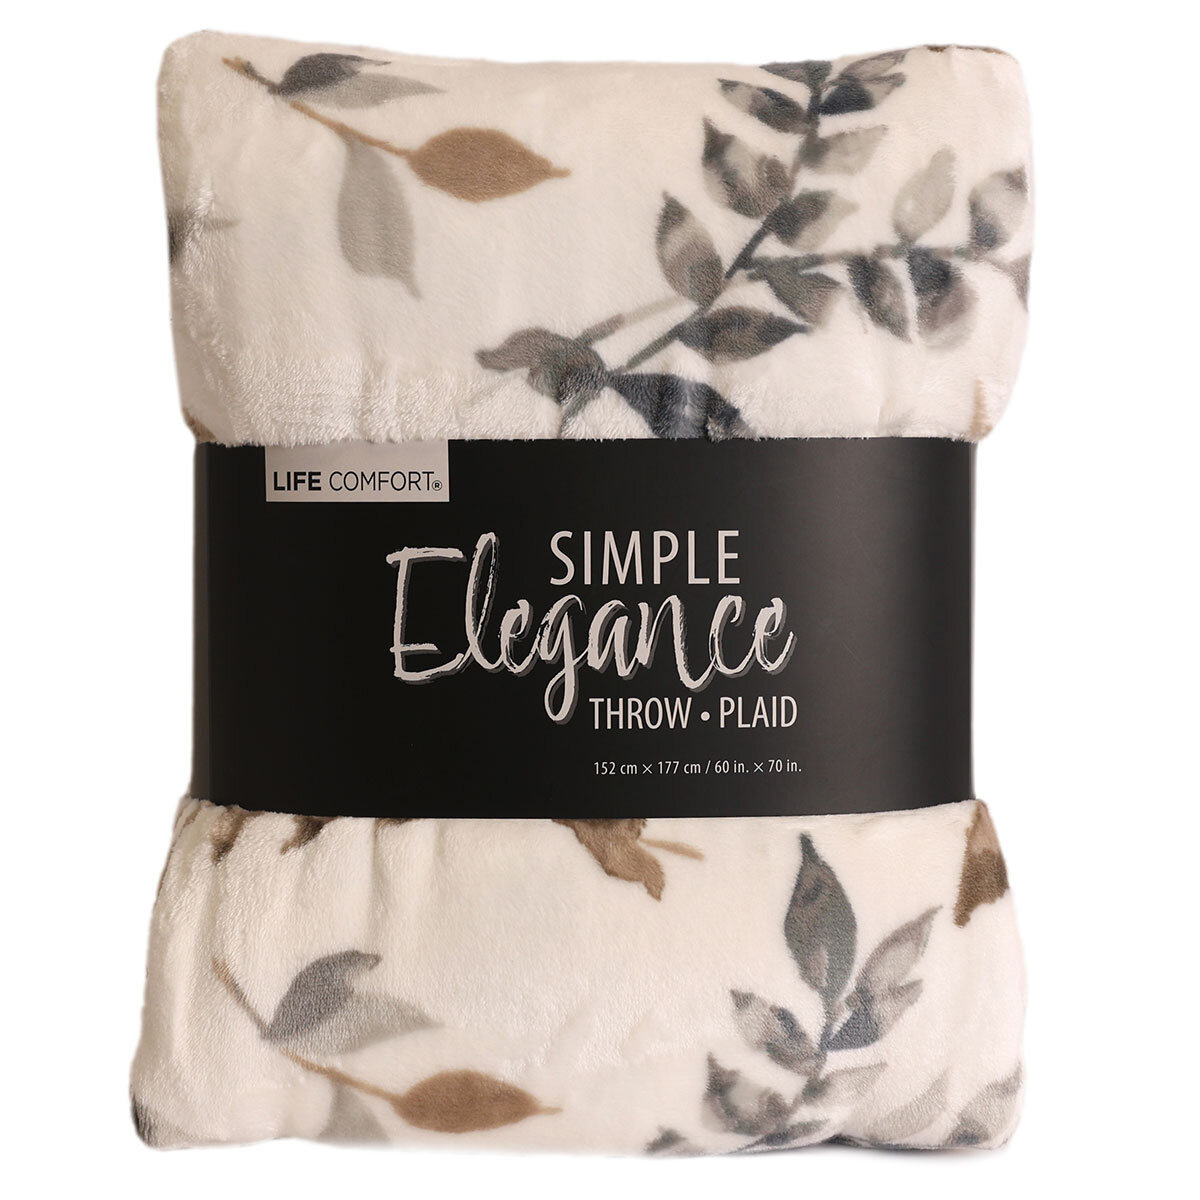 Leafy printed plush throw in packaging